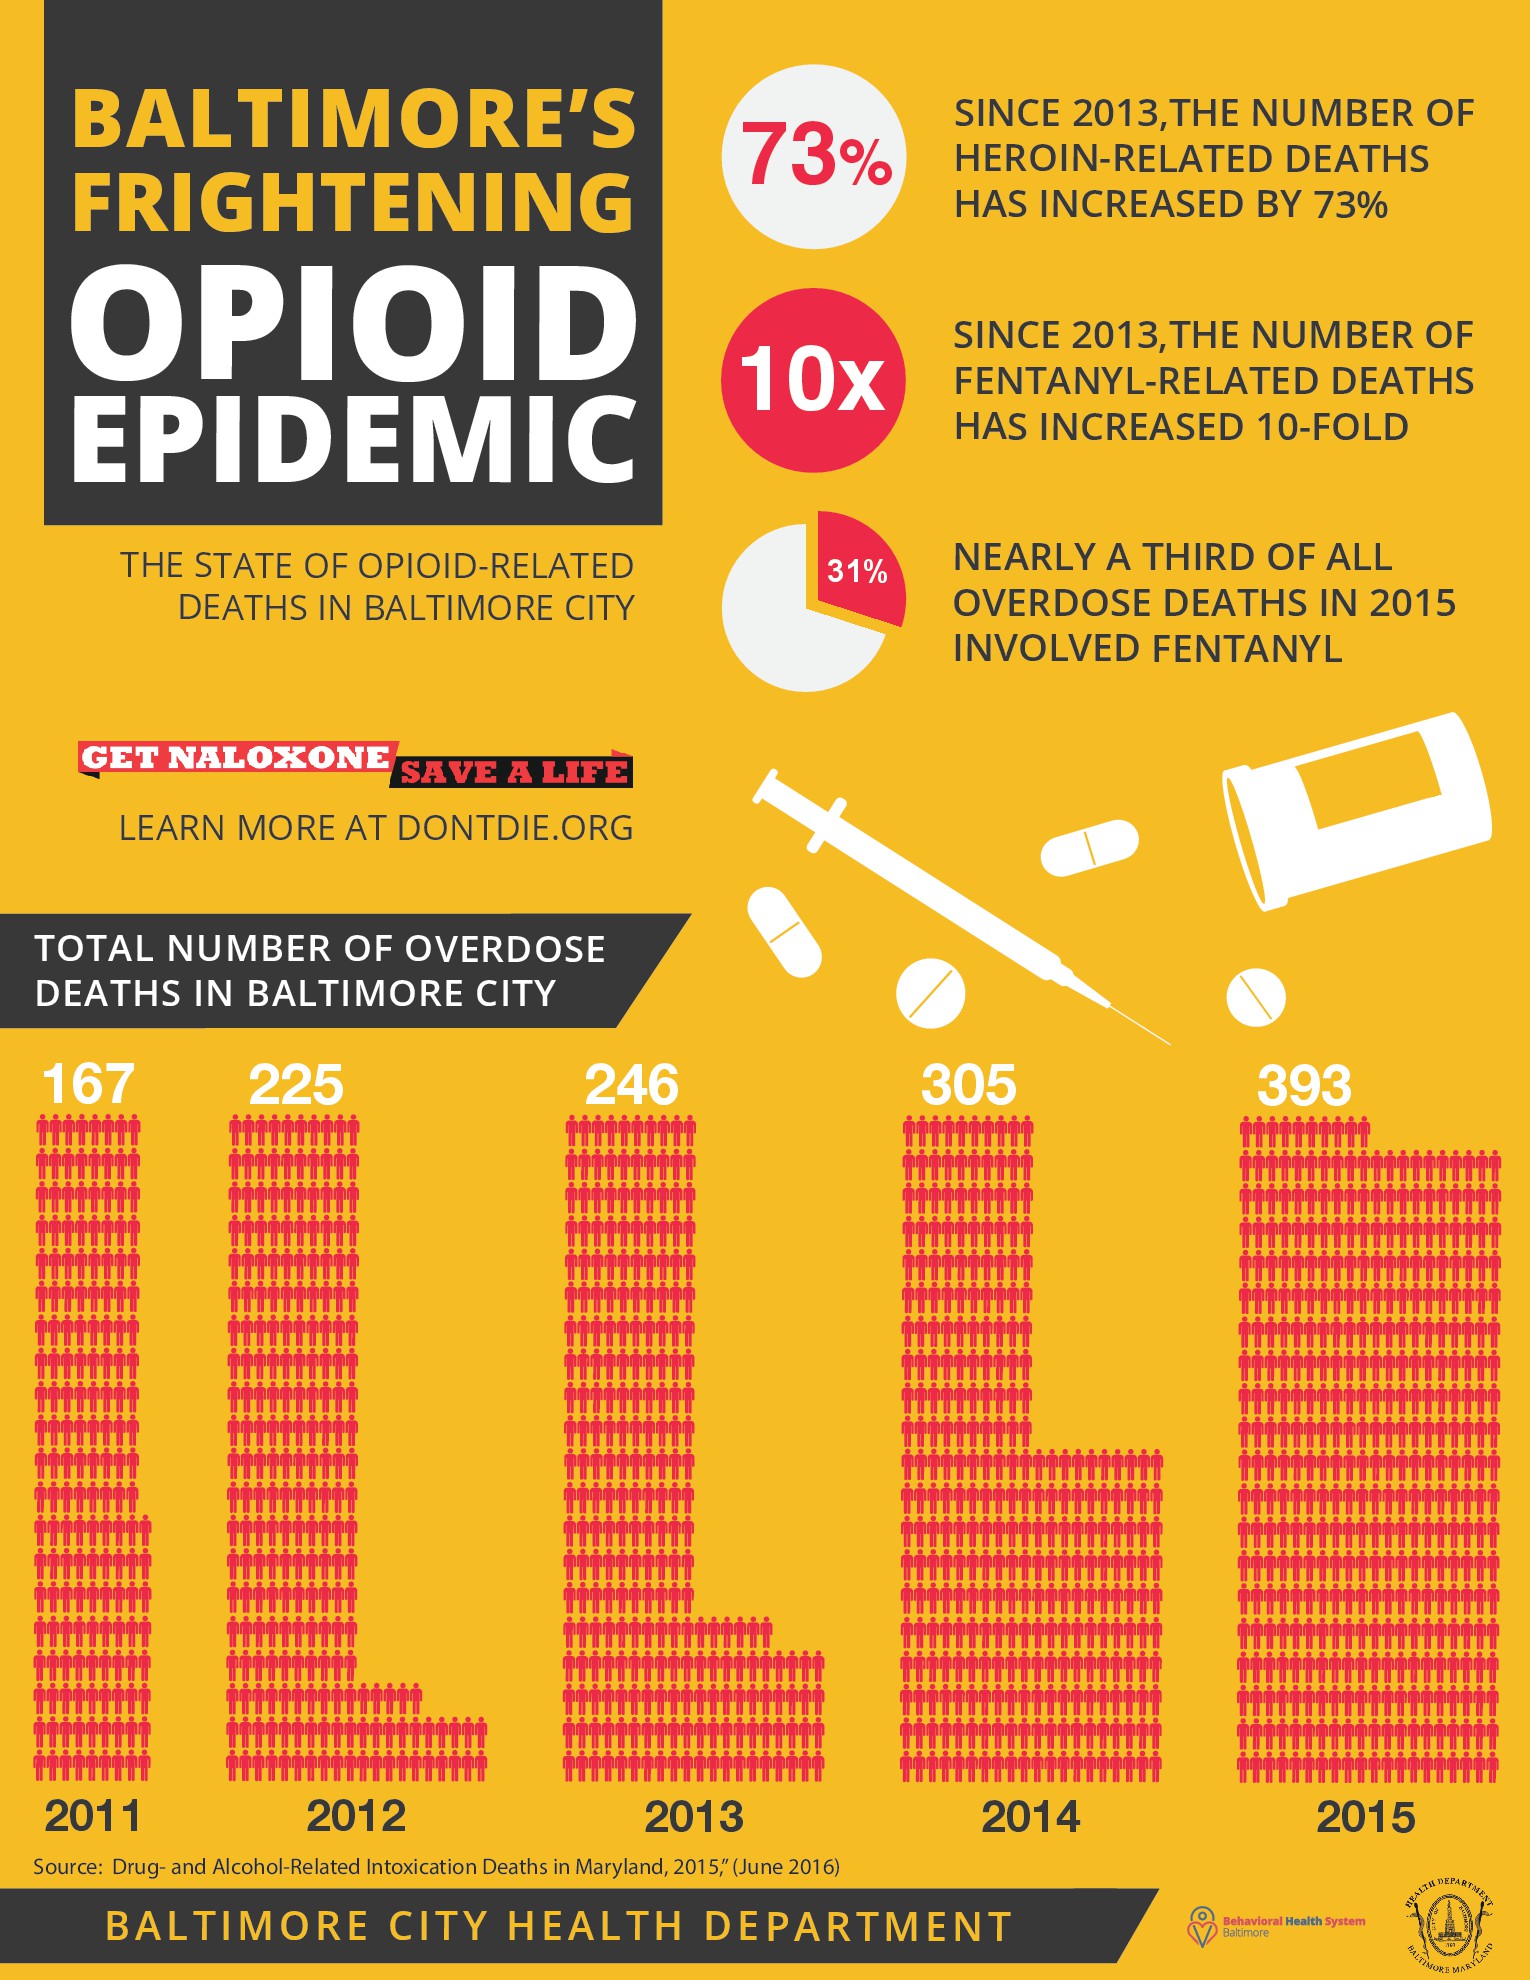 Baltimore City's opioid-related overdoses